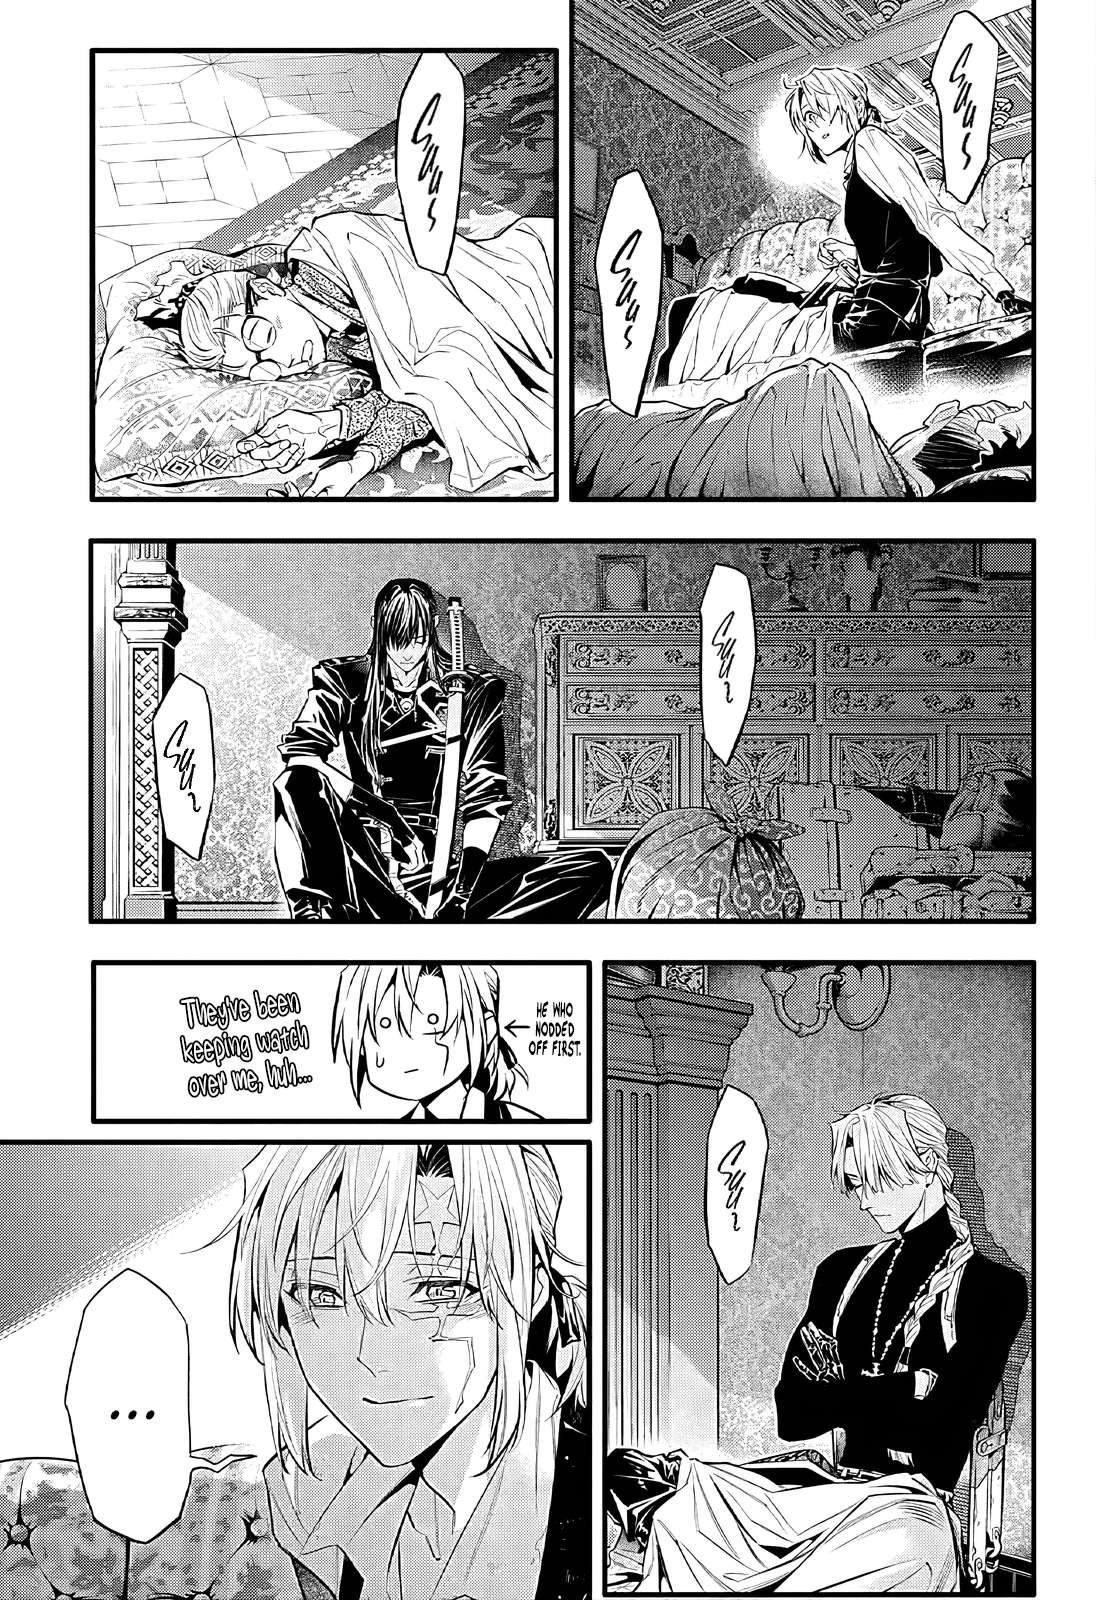 D.Gray-man chapter 248 page 5